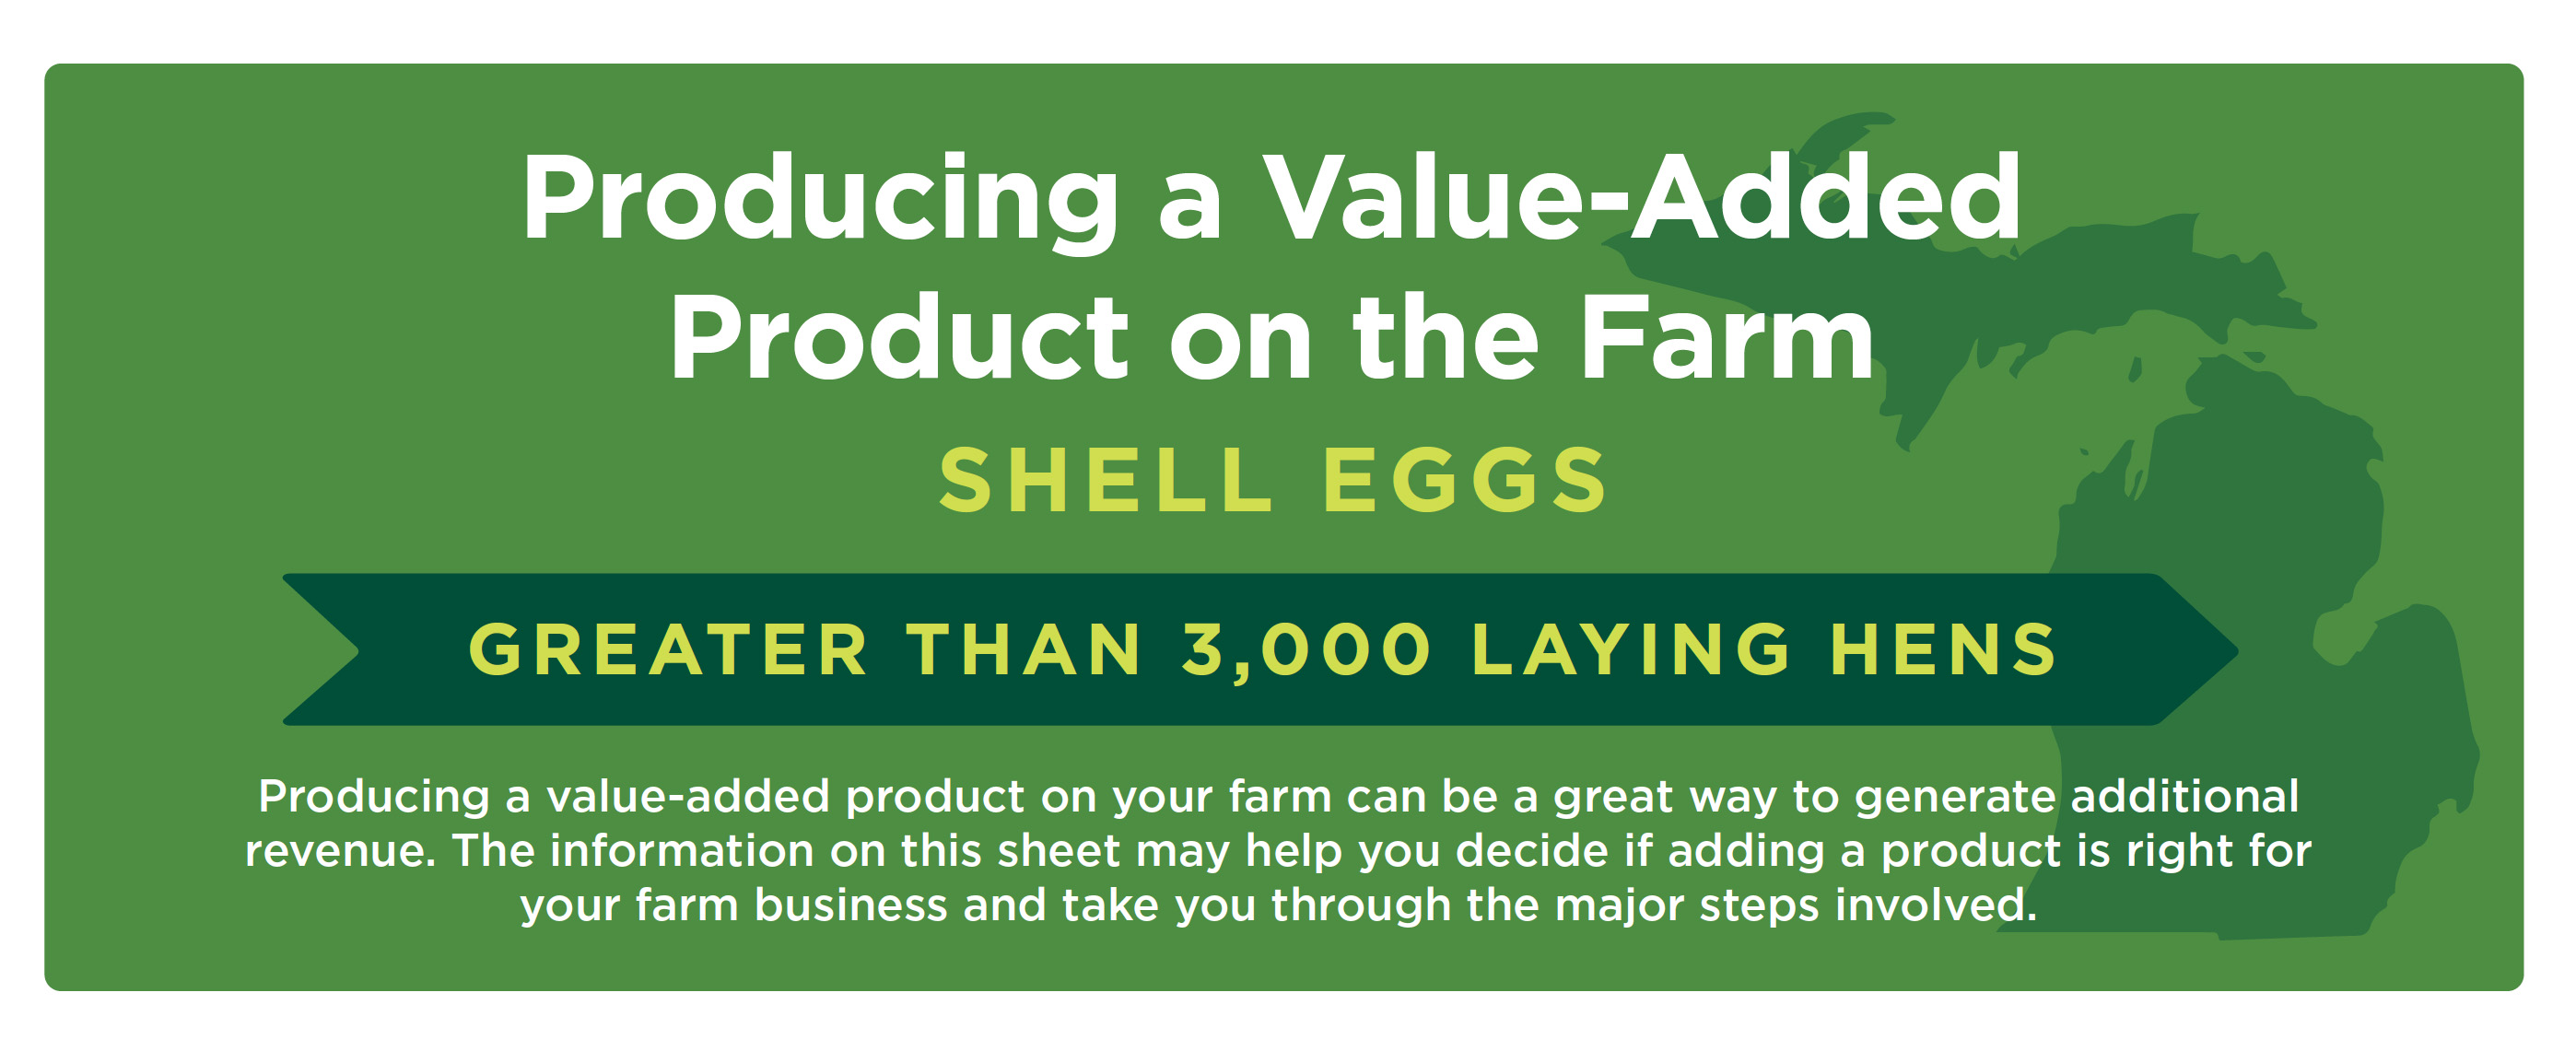 Producing a Value-Added Product on the Farm: Shell Eggs - Greater than 3,000 Laying Hens